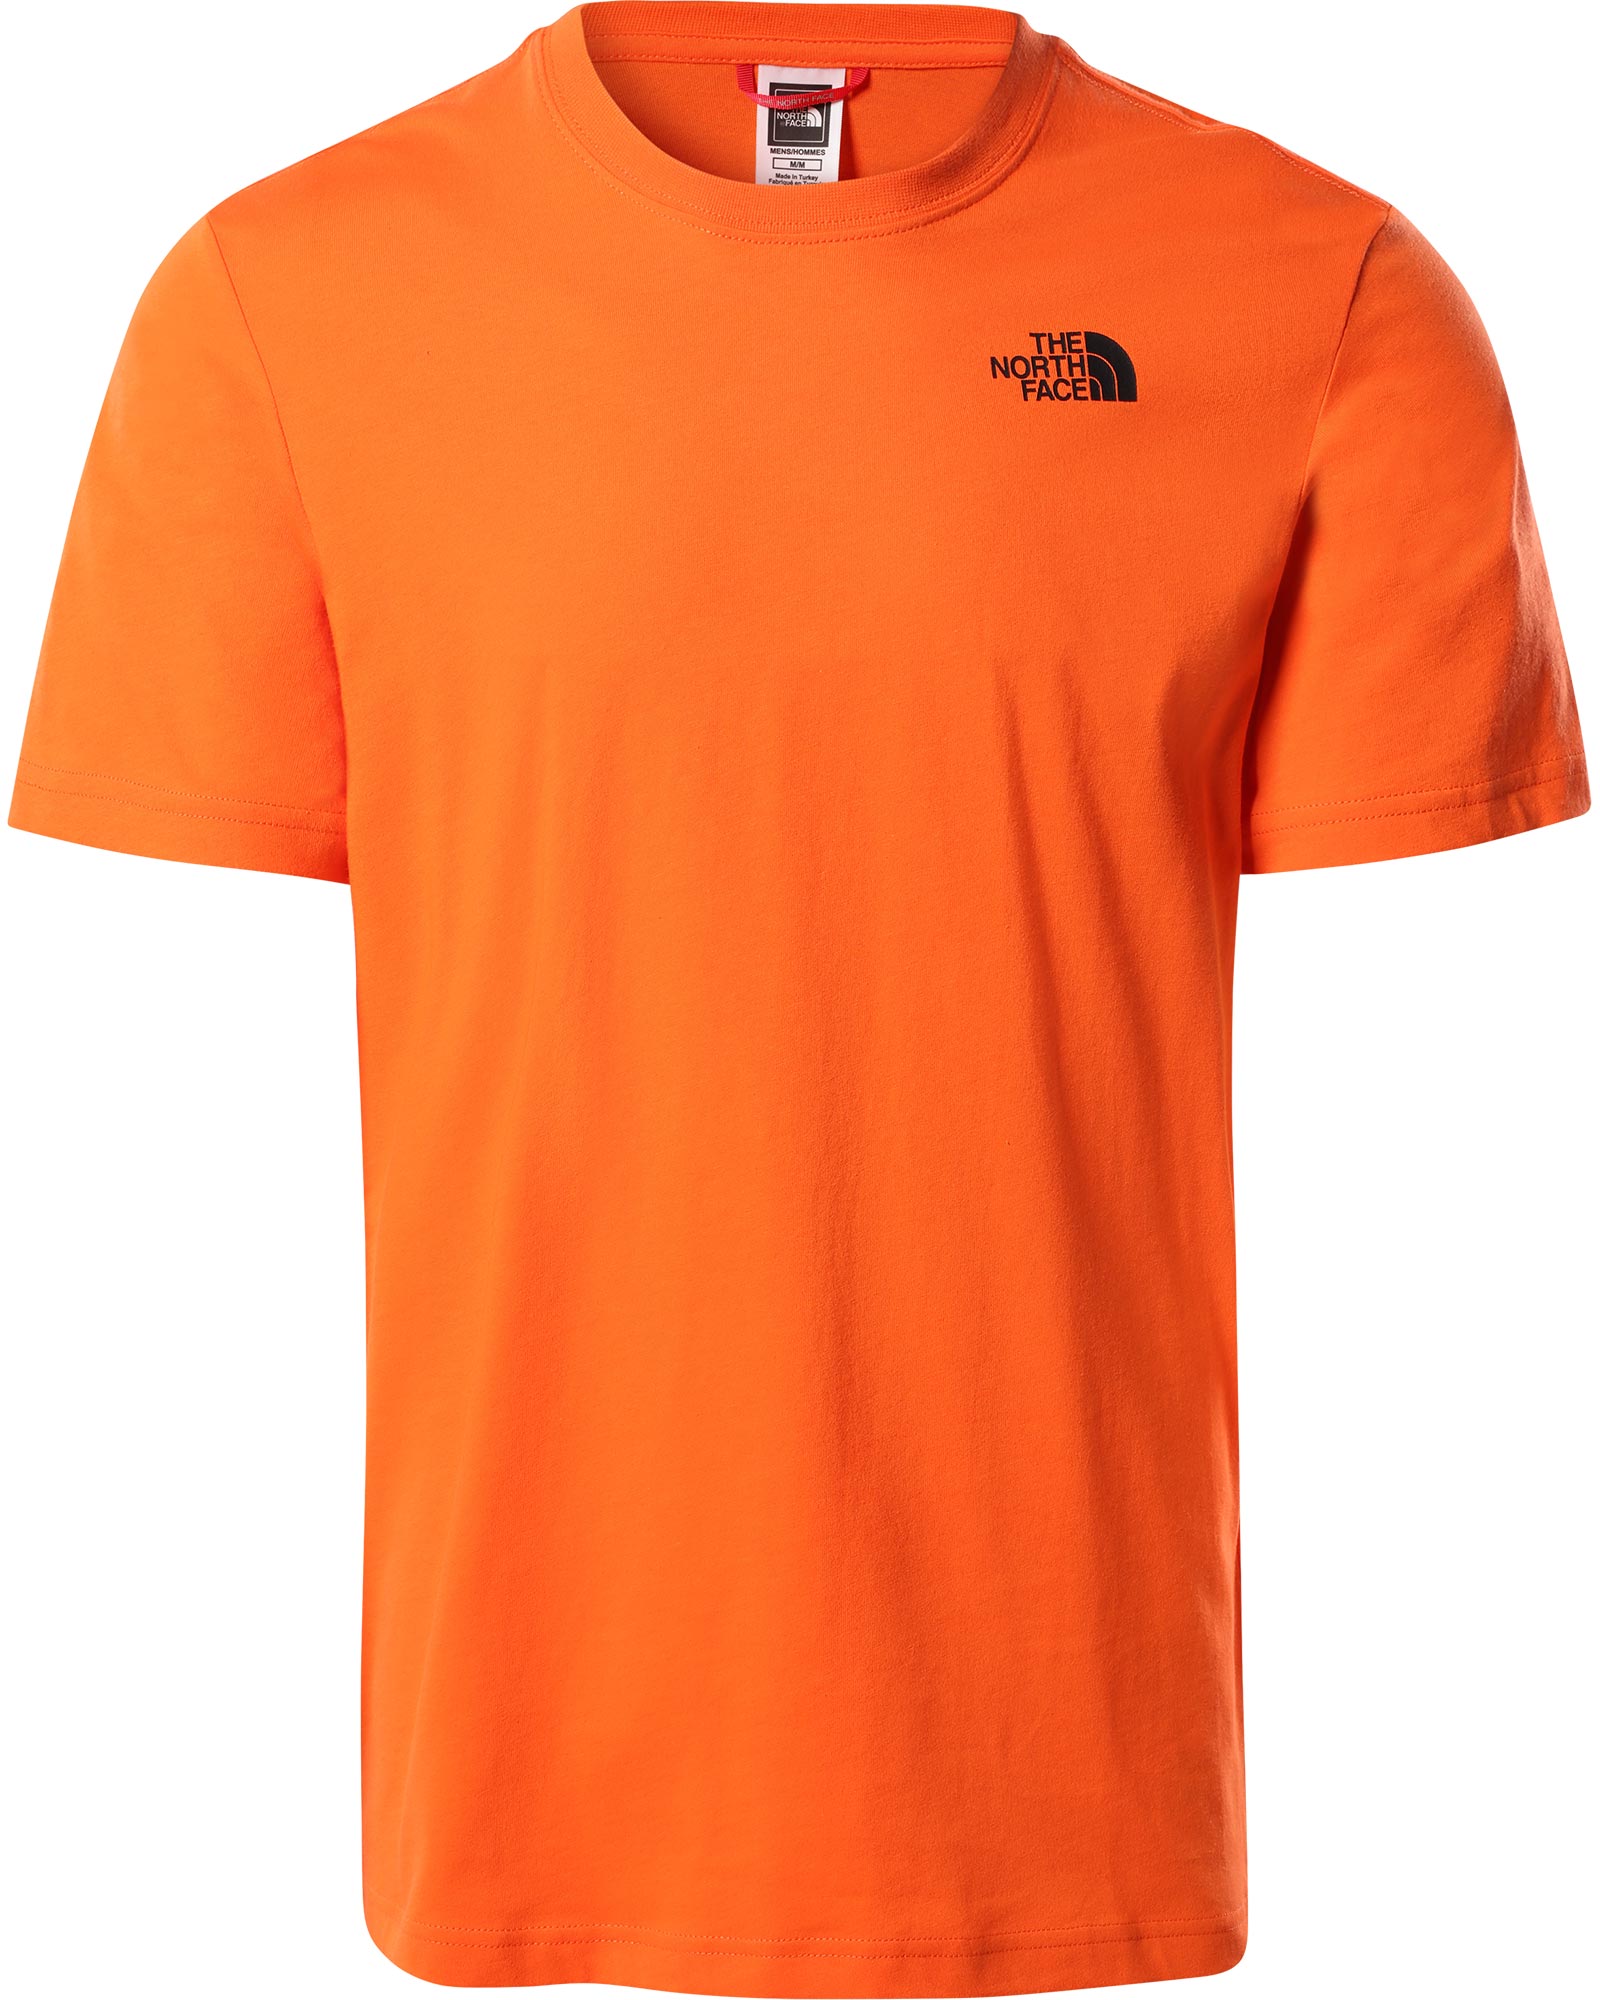 The North Face Red Box Men’s T Shirt - Flame XS